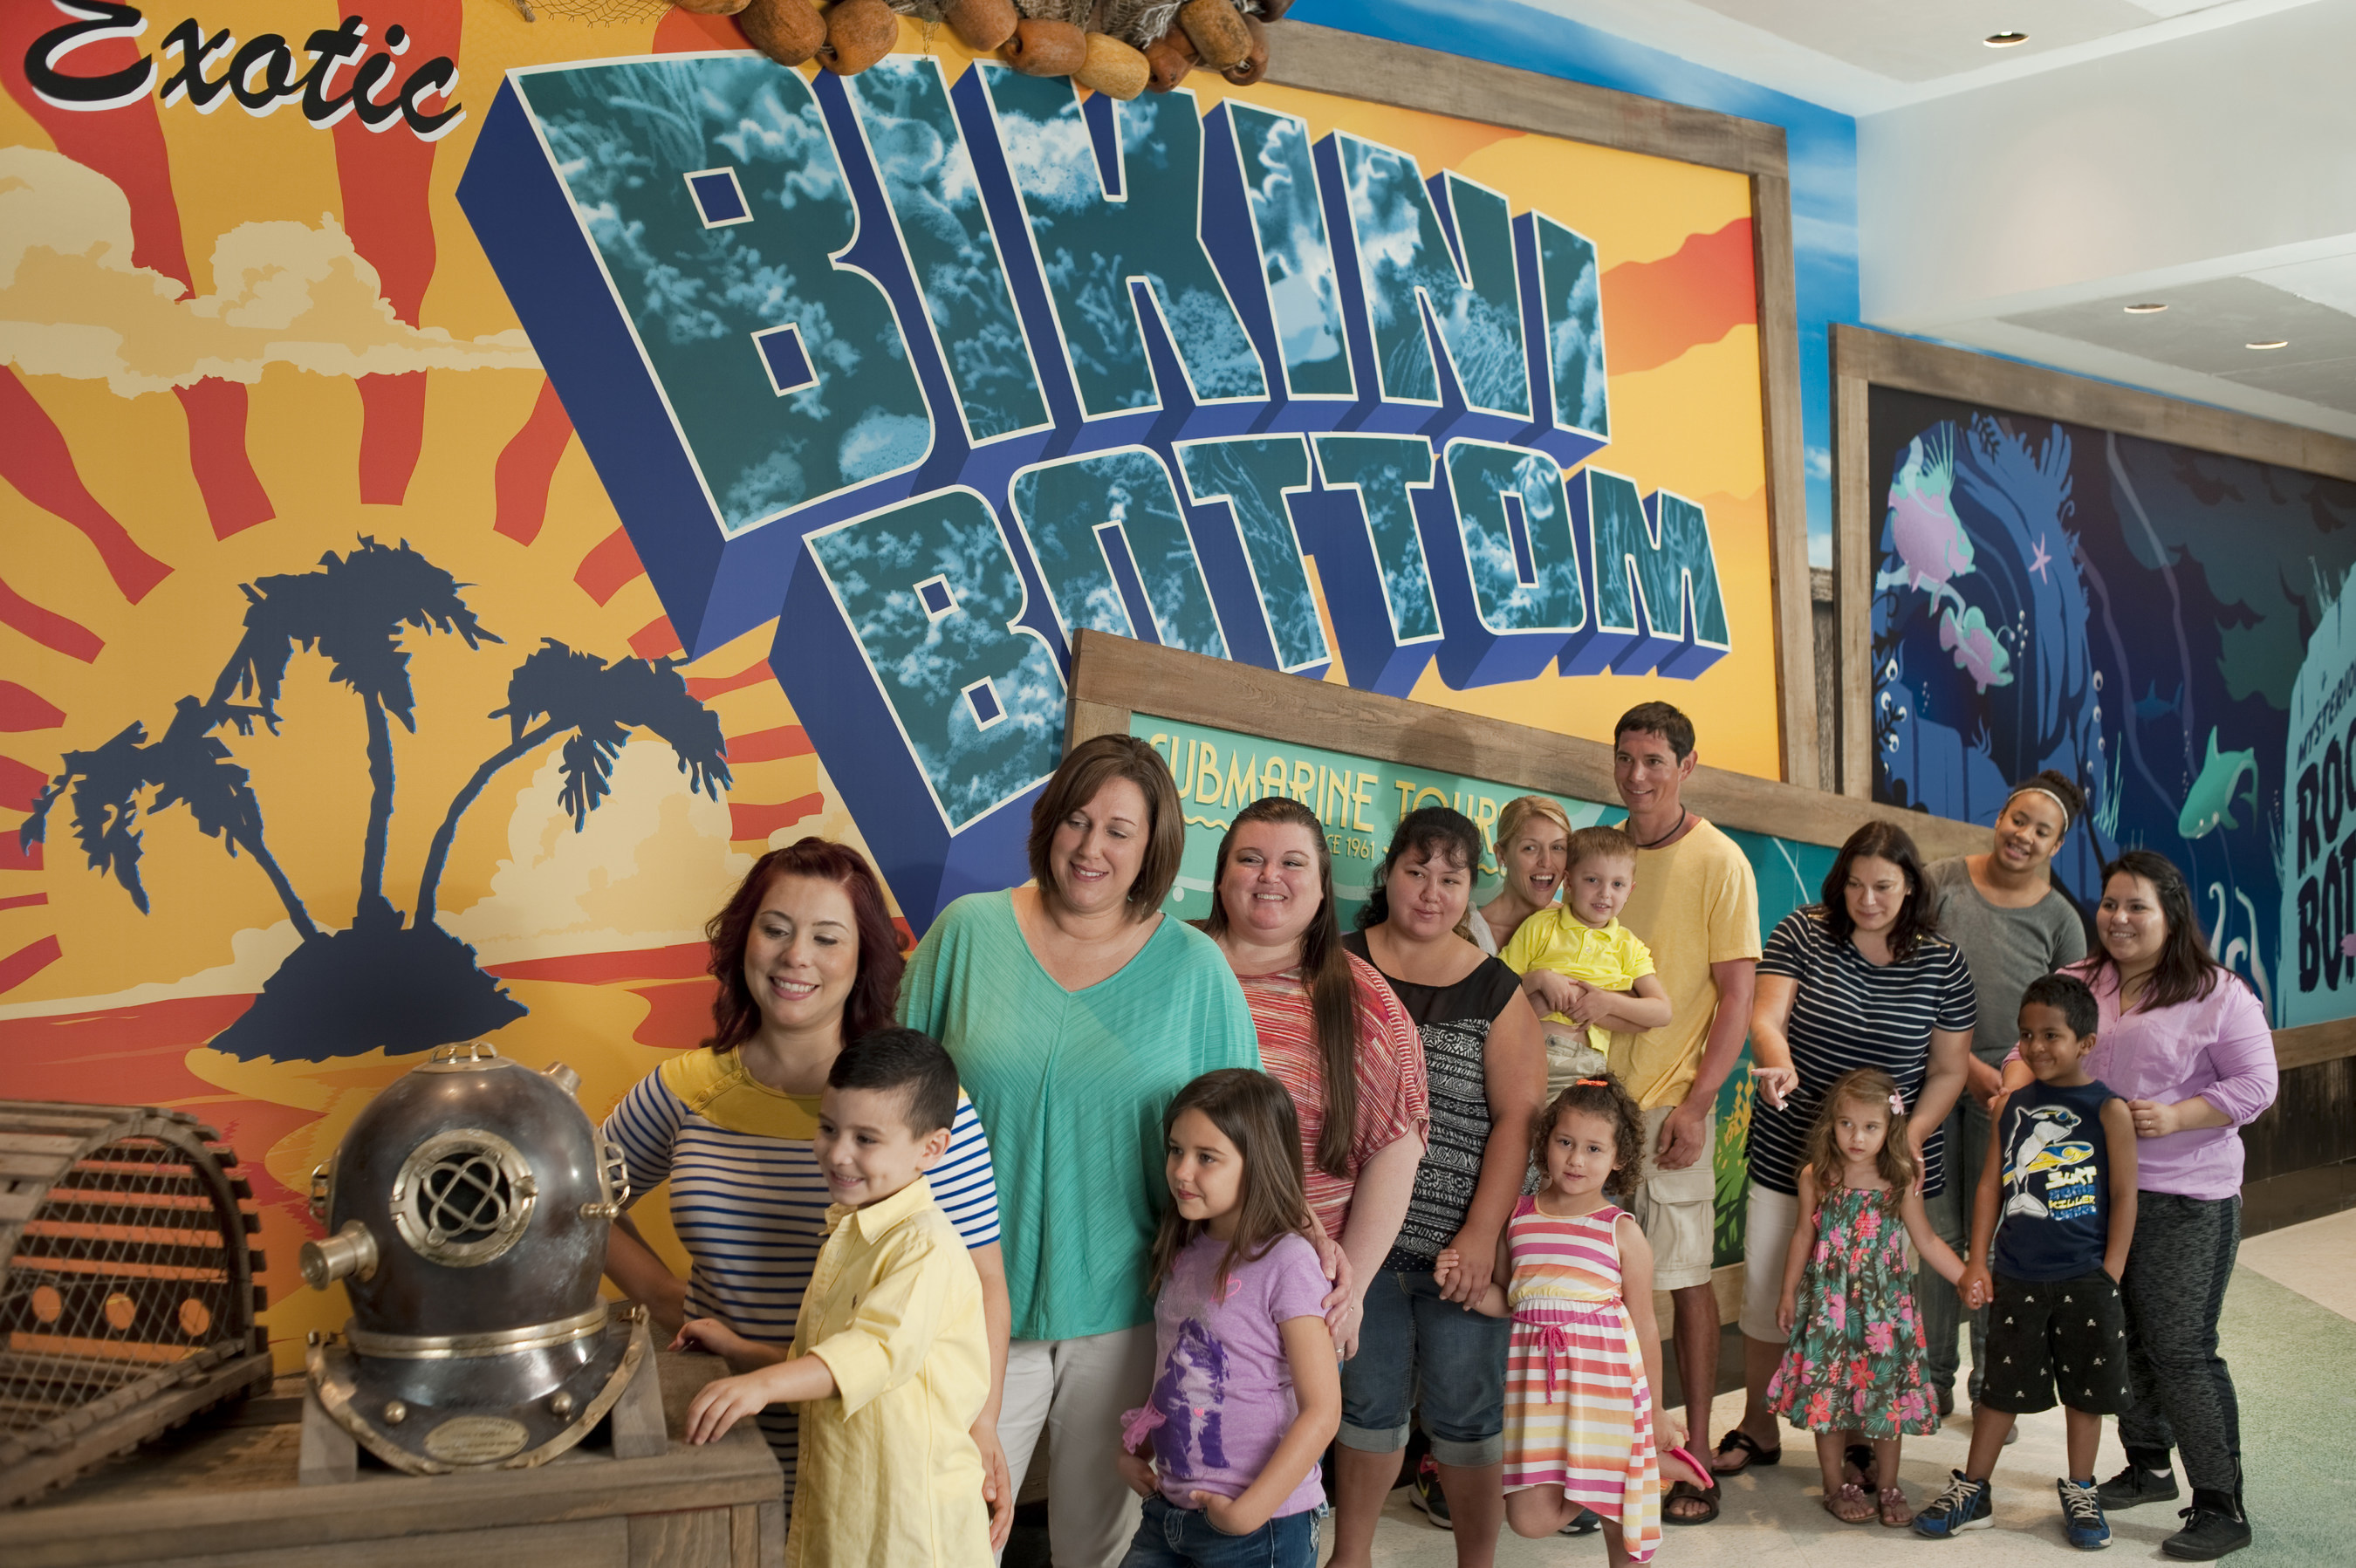 Children and parents view a brass dive helmet and crab trap near the Bikini Bottom mural before entering the new Nickelodeon SpongeBob SubPants Adventure. It opens Memorial Day Weekend at the Discovery Pyramid at Moody Gardens in Galveston, Texas.